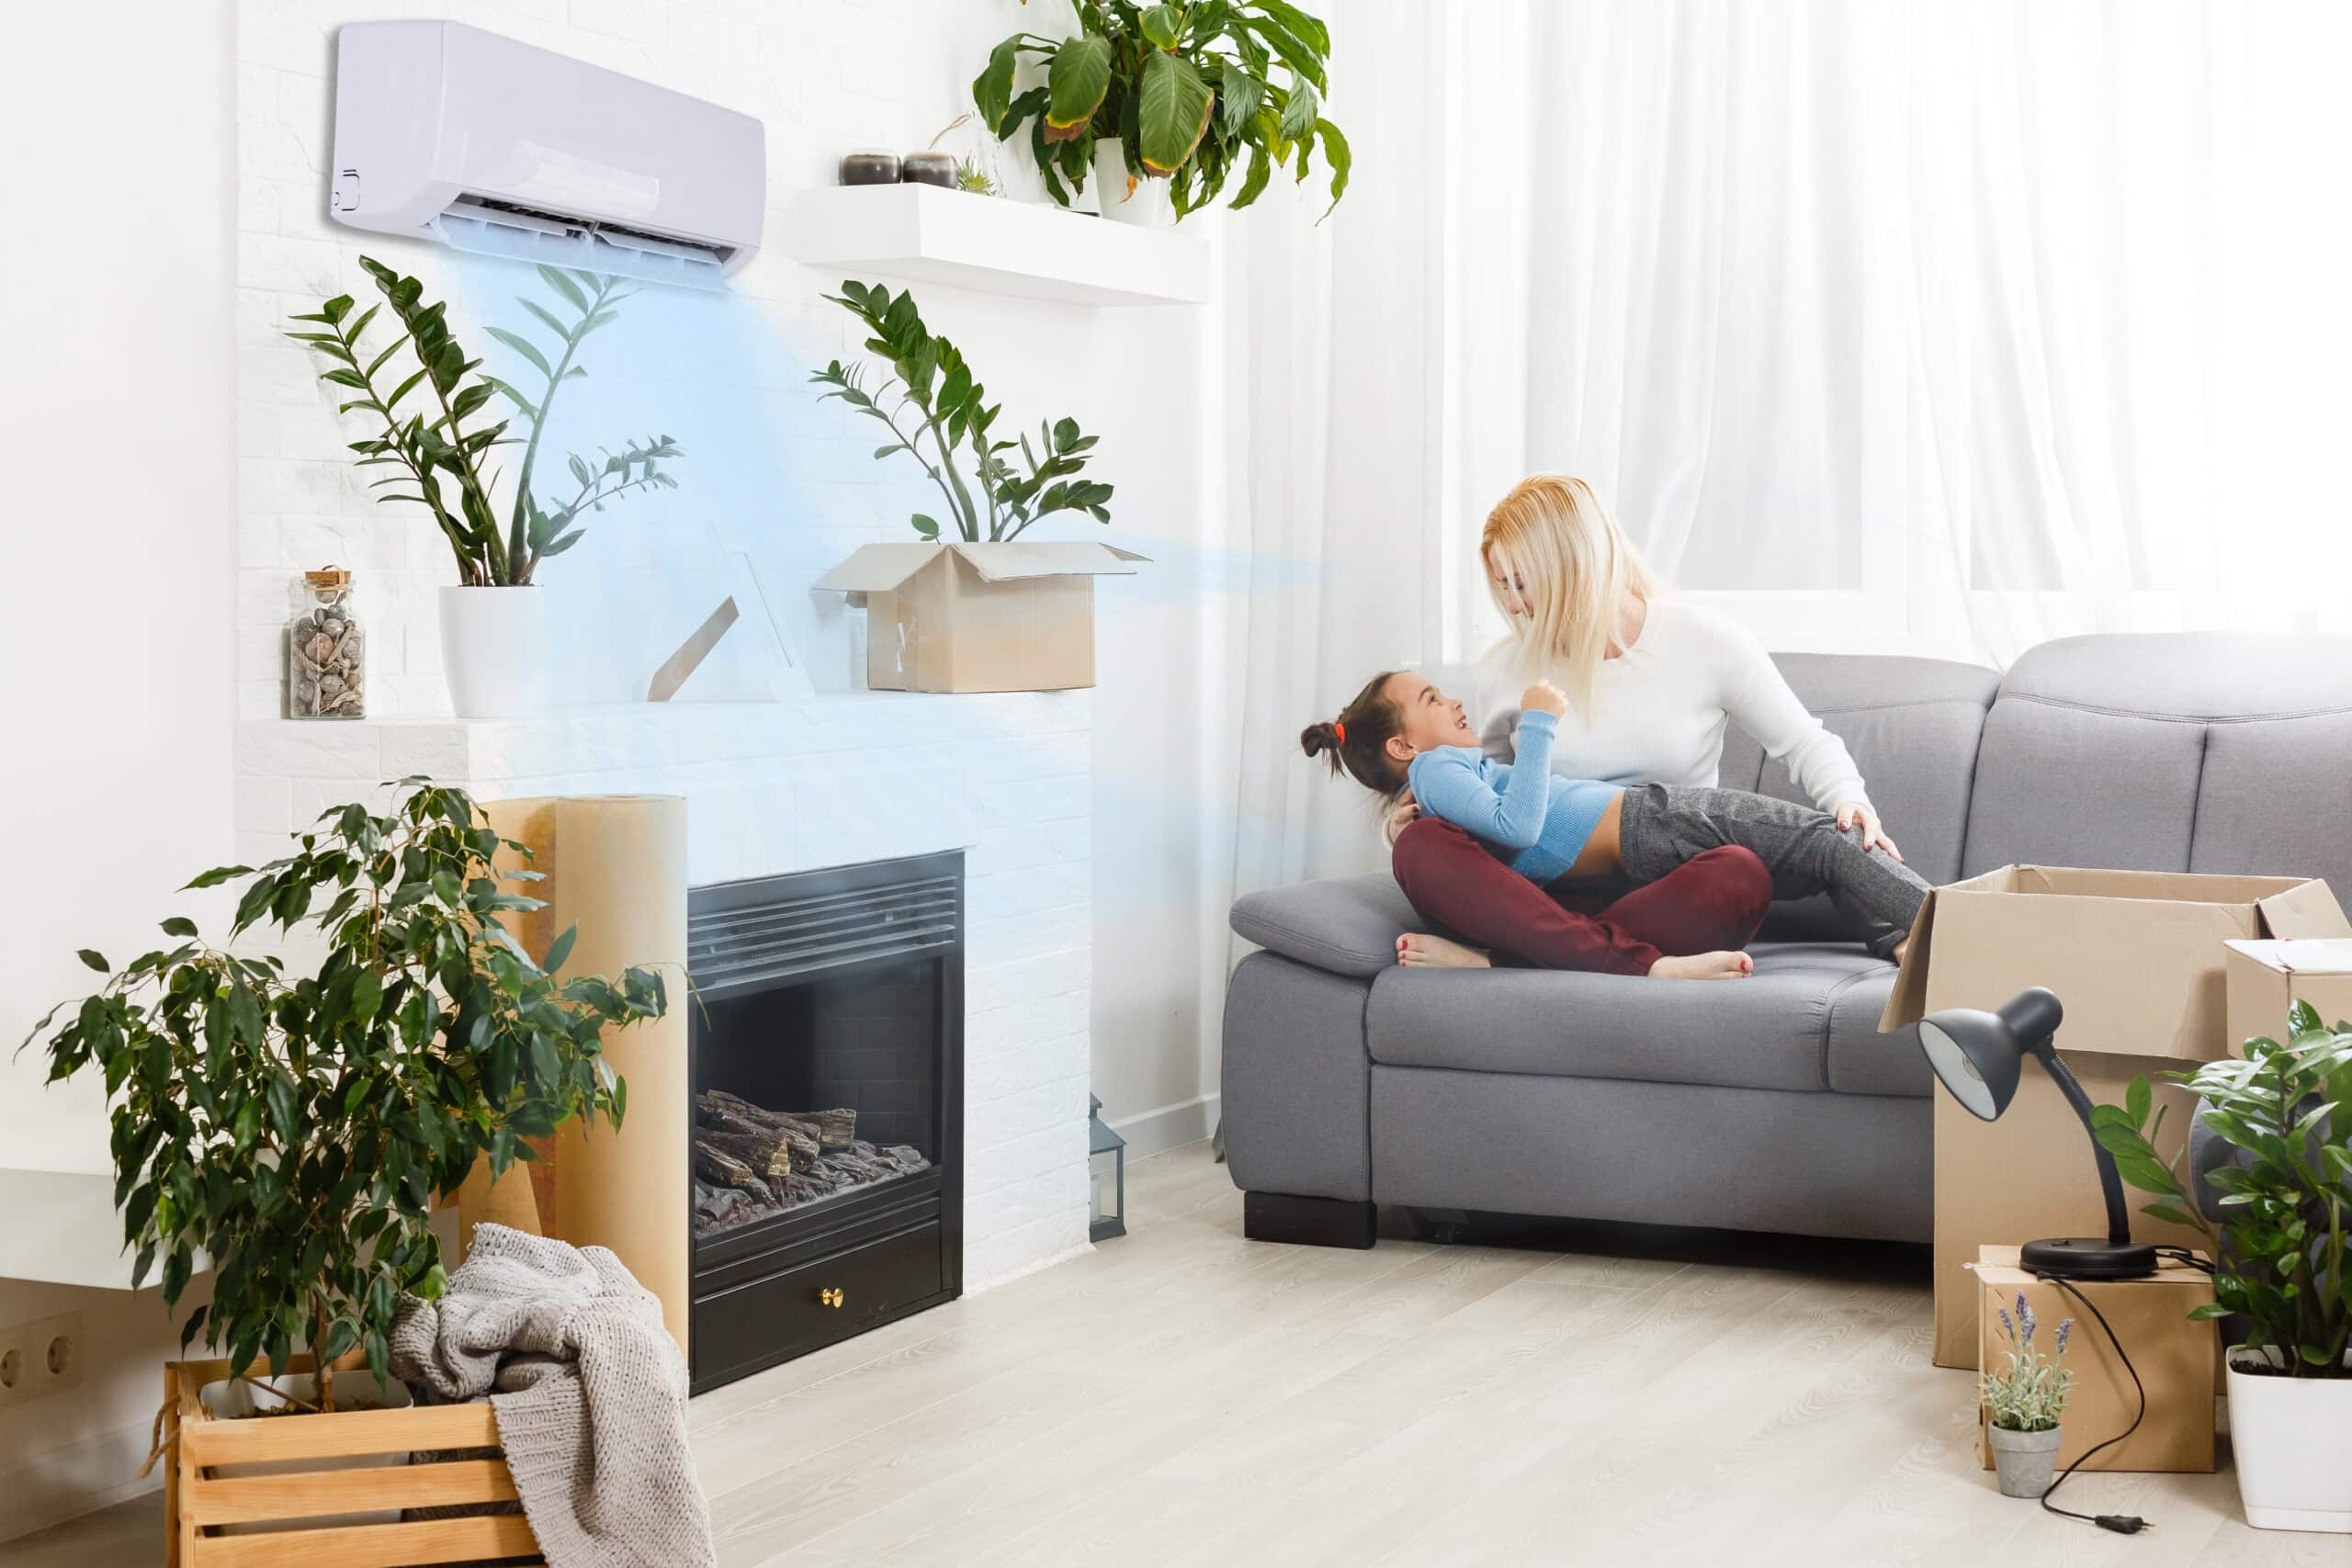 Parent and child in living room with good air quality